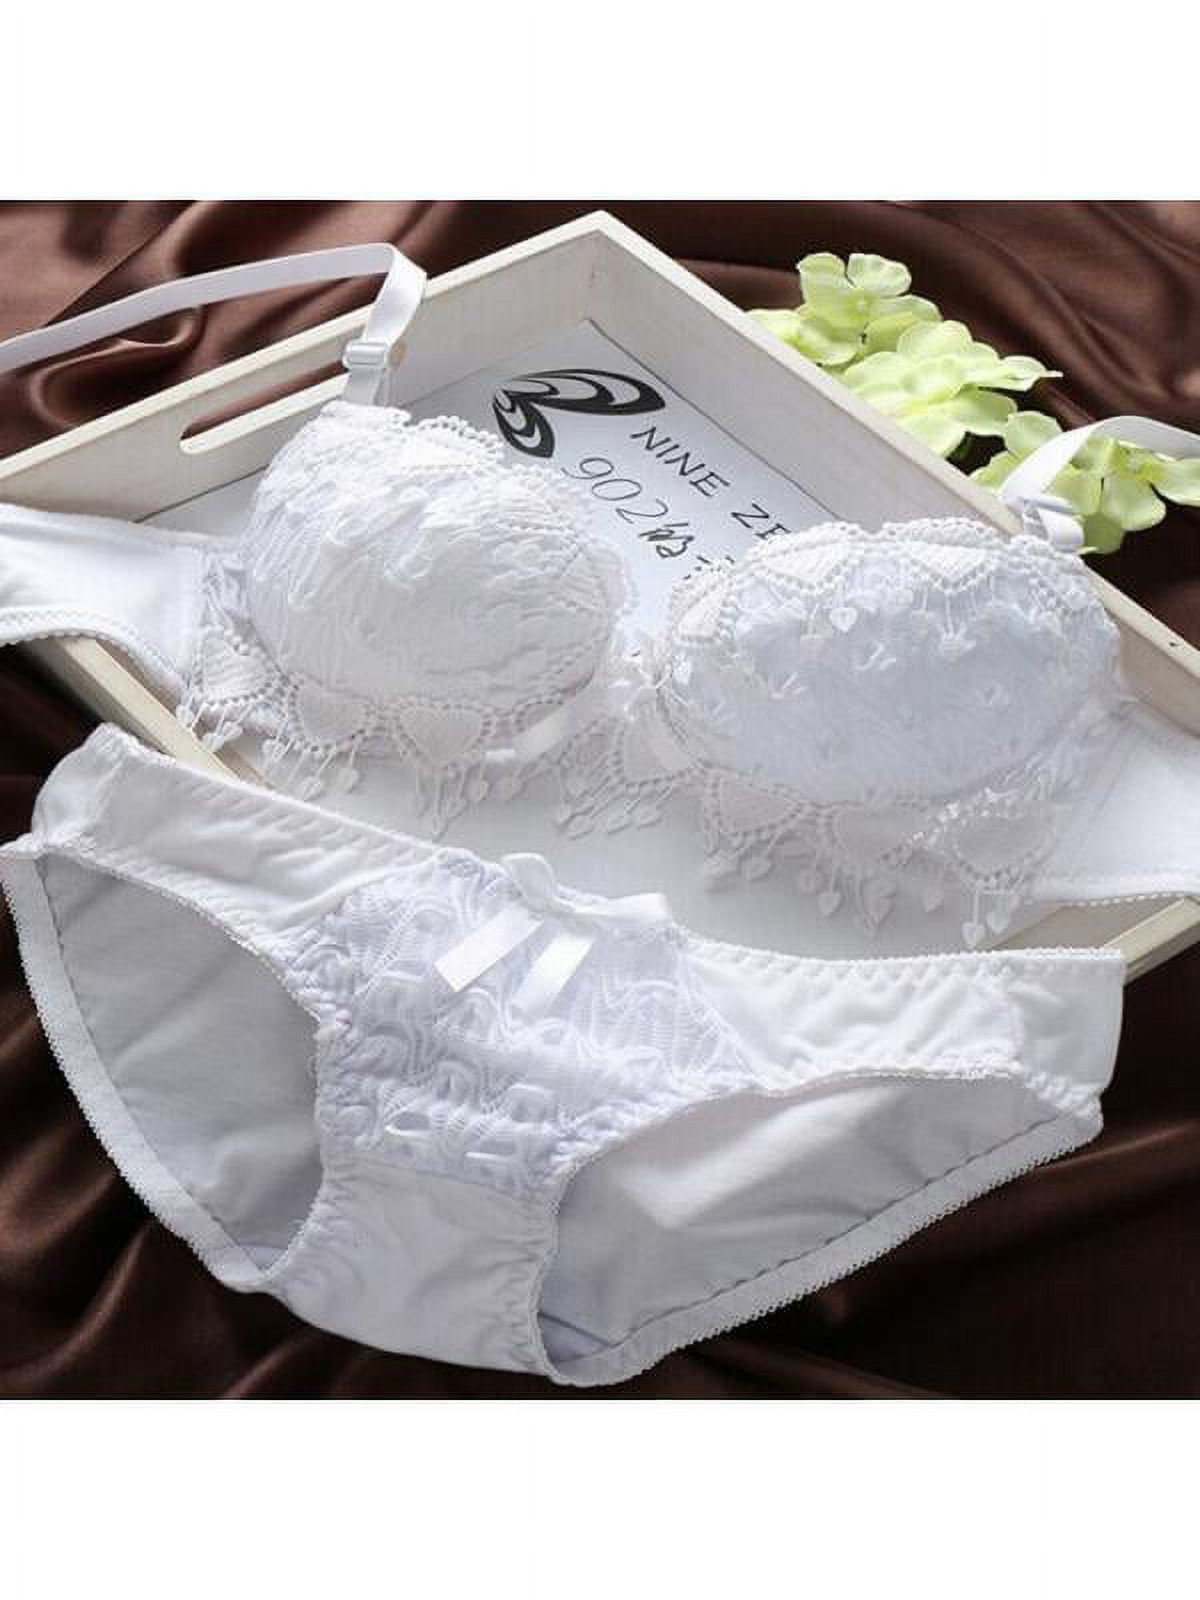 Women's Sexy Romantic Embroidery Lace Extreme Padded Push Up